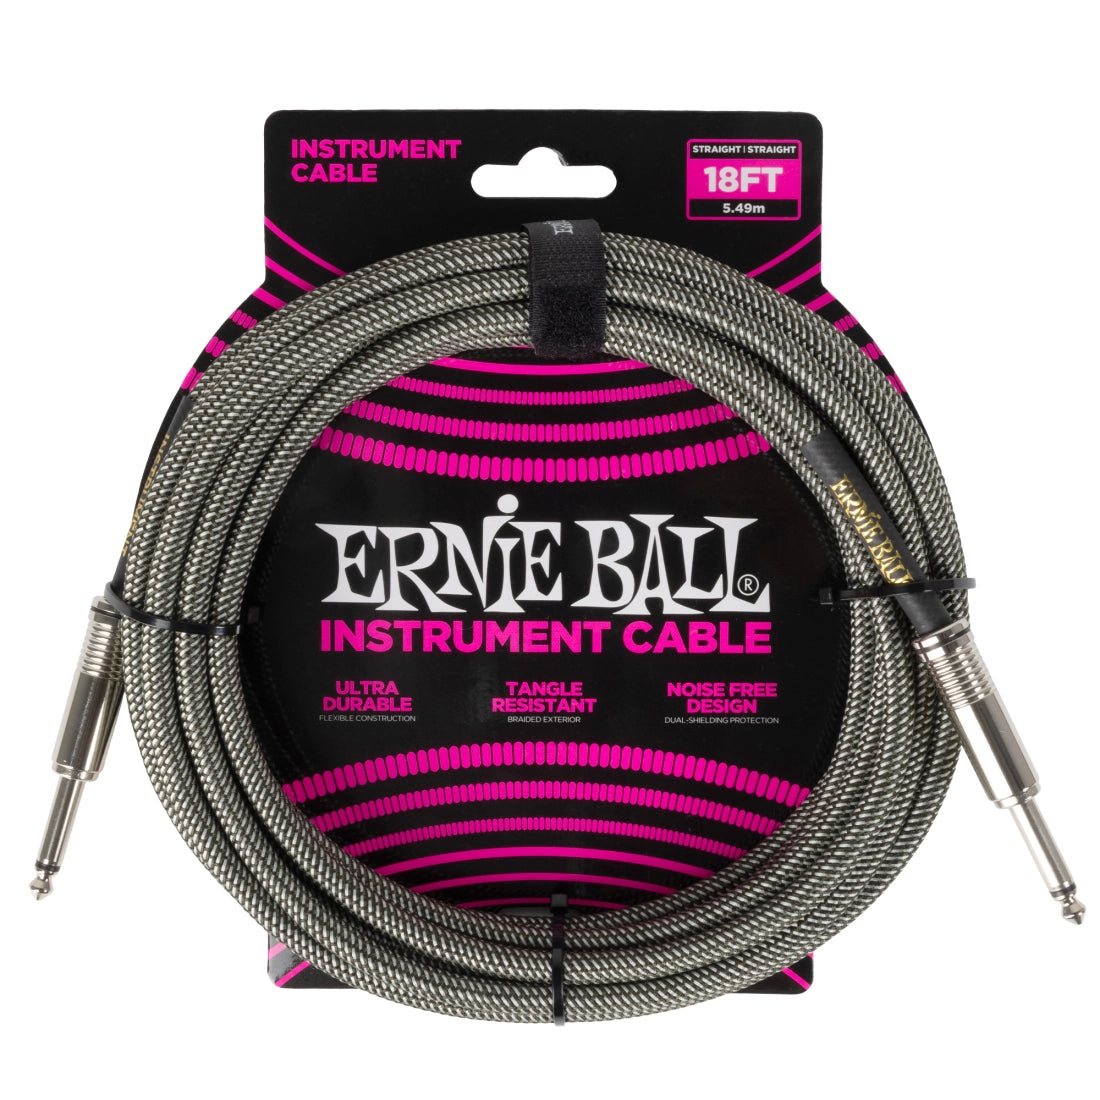 Ernie Ball 18ft Braided Instrument Cable - Silver Fox - Joondalup Music Centre